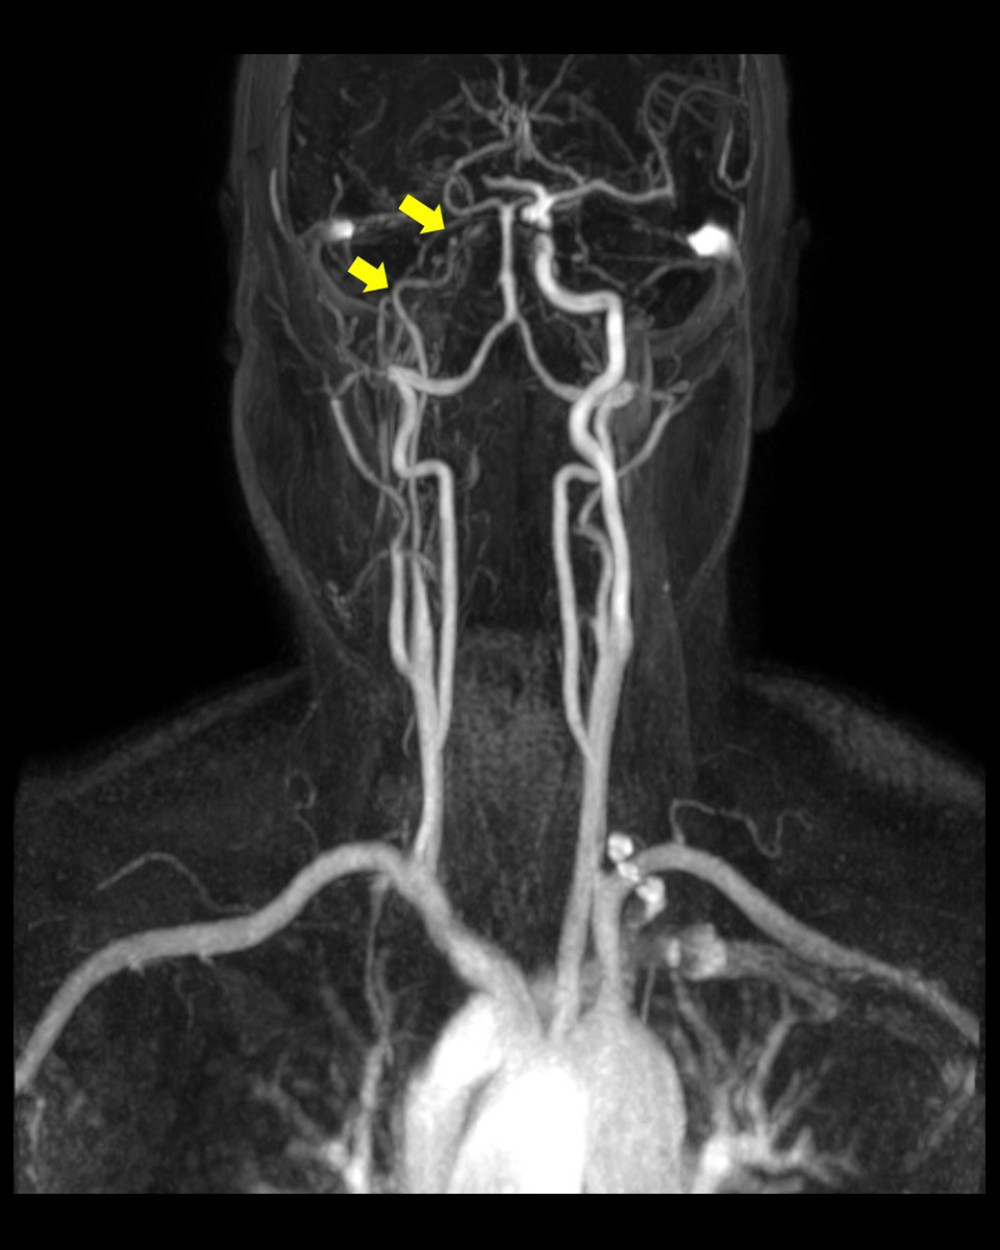 The brain magnetic resonance angiography shows stenosis of the right internal carotid artery with occlusion from the cavernous segment.